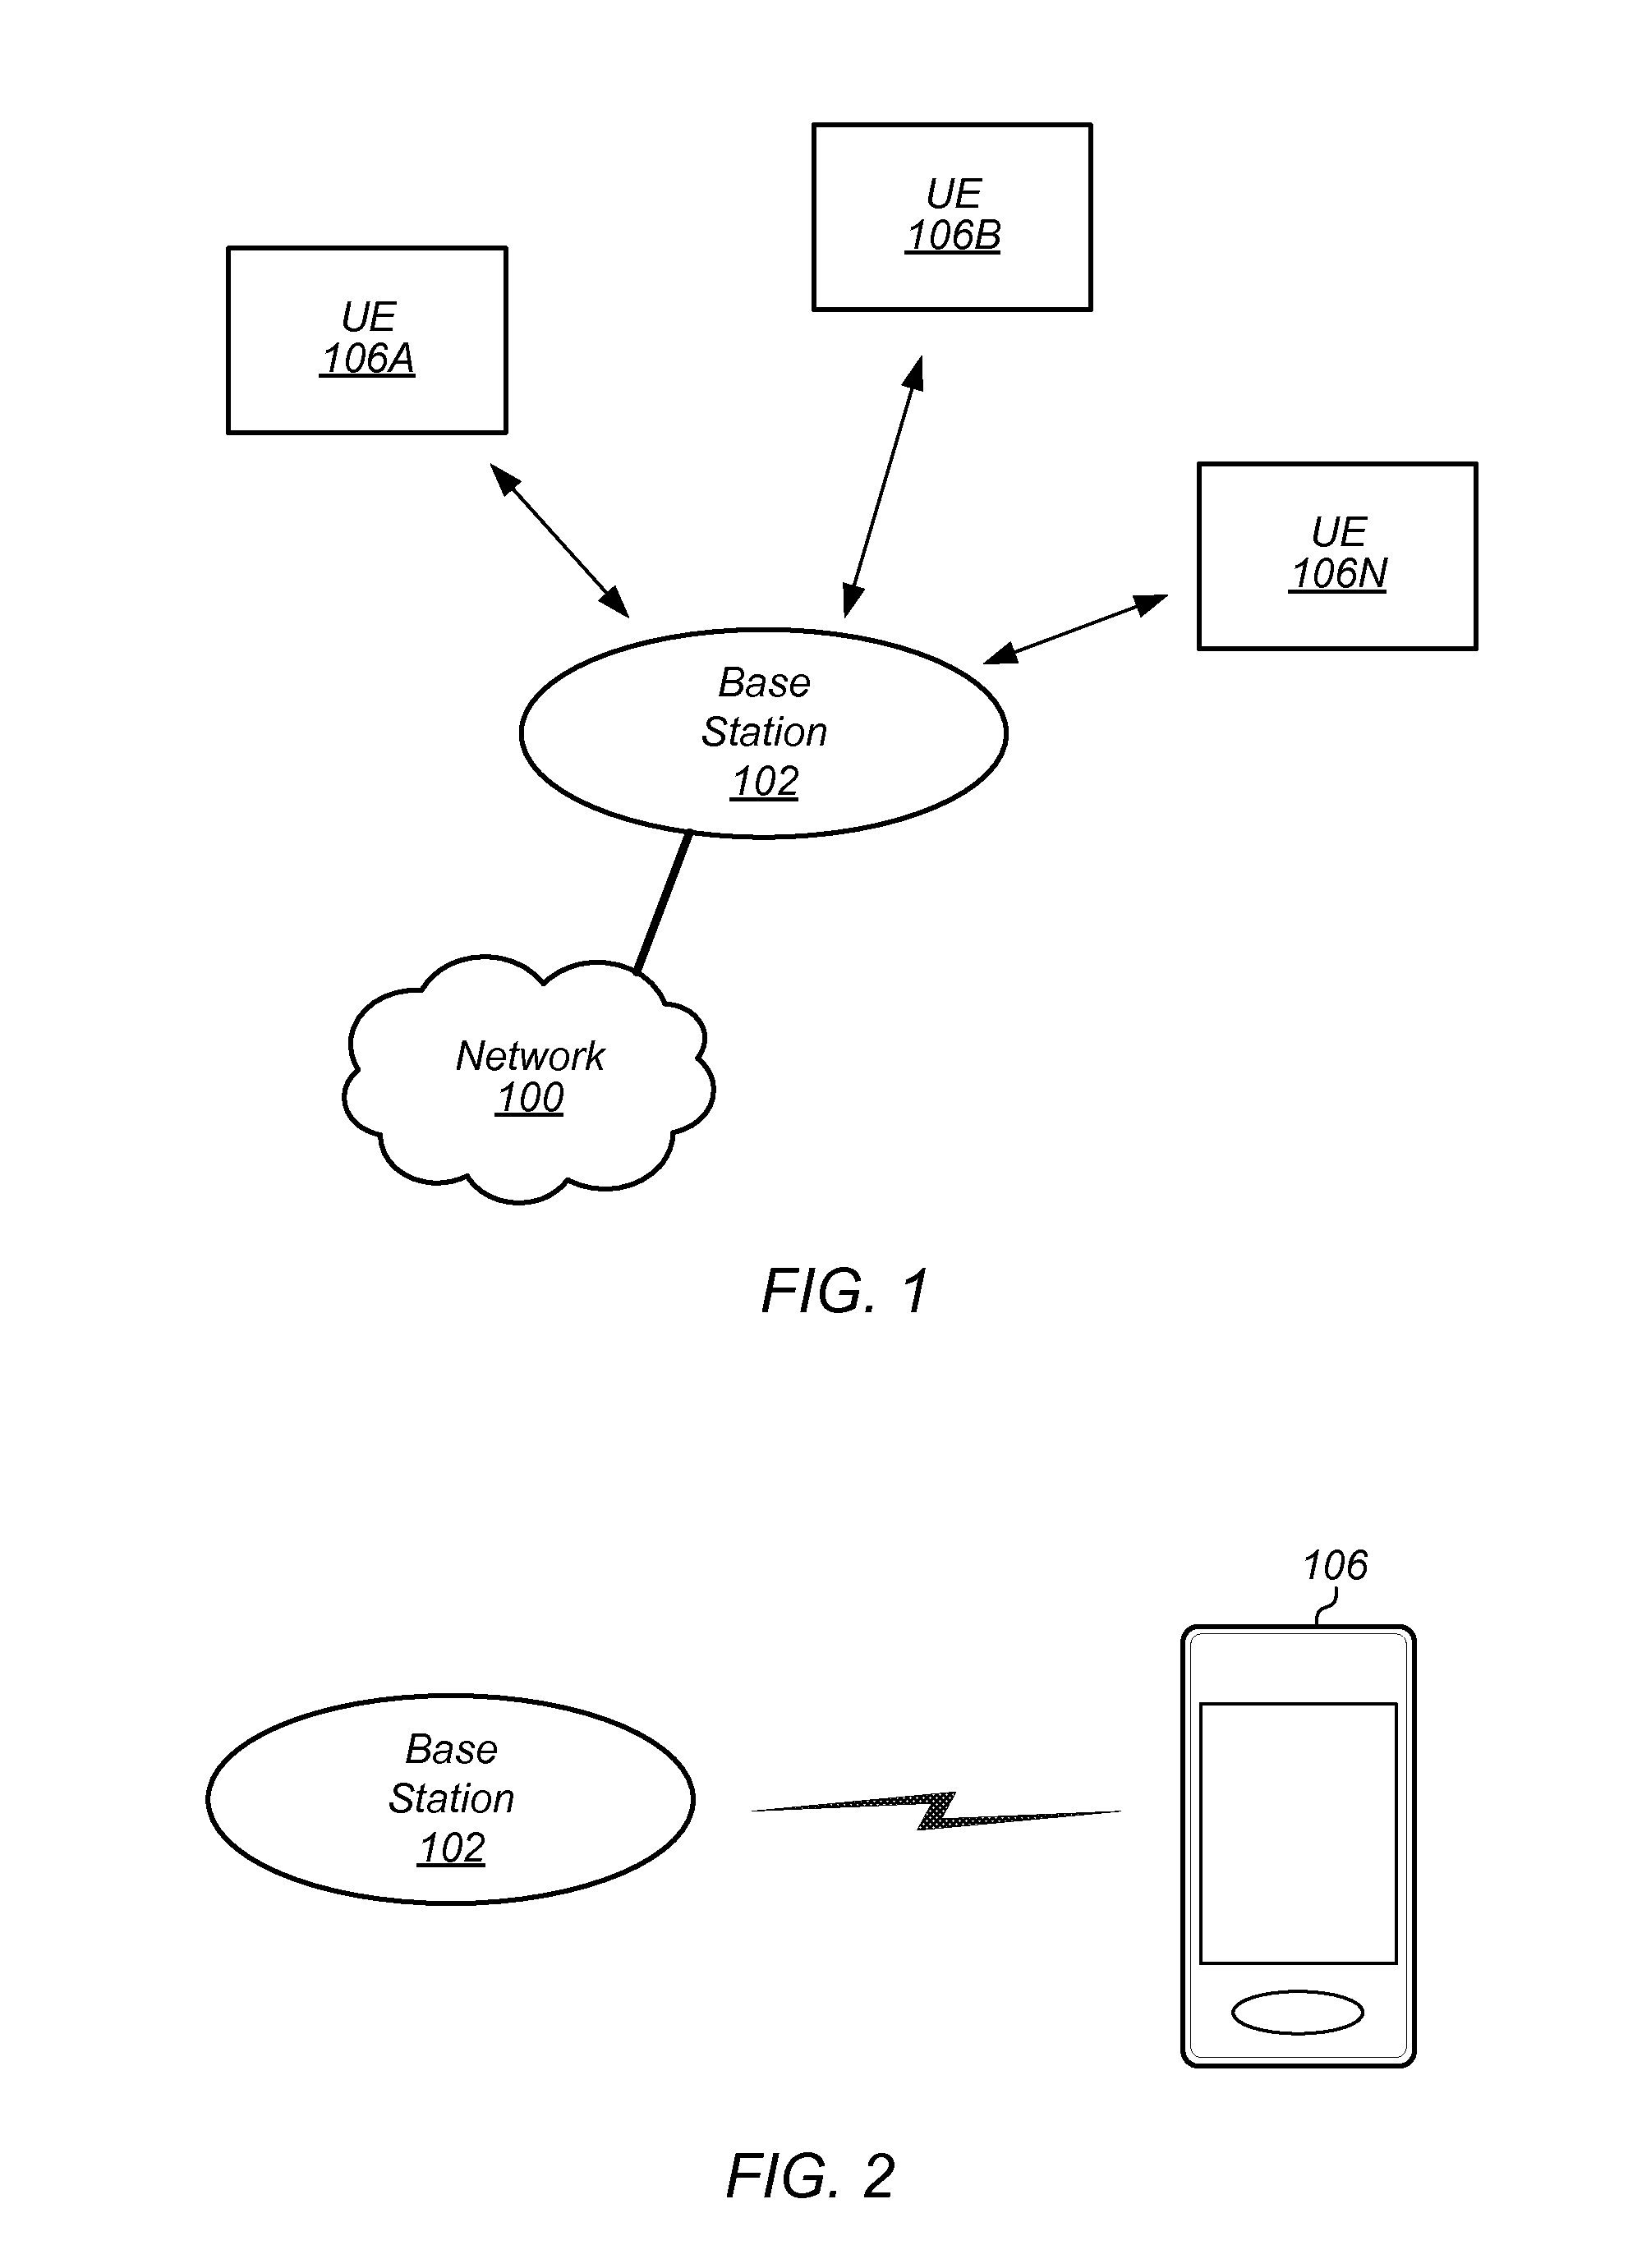 Application-Aware Multiple Wireless Radio-Access Technology Coexistence Solution and Time Sharing Between Multiple Radio-Access Technologies for In-Device Coexistence